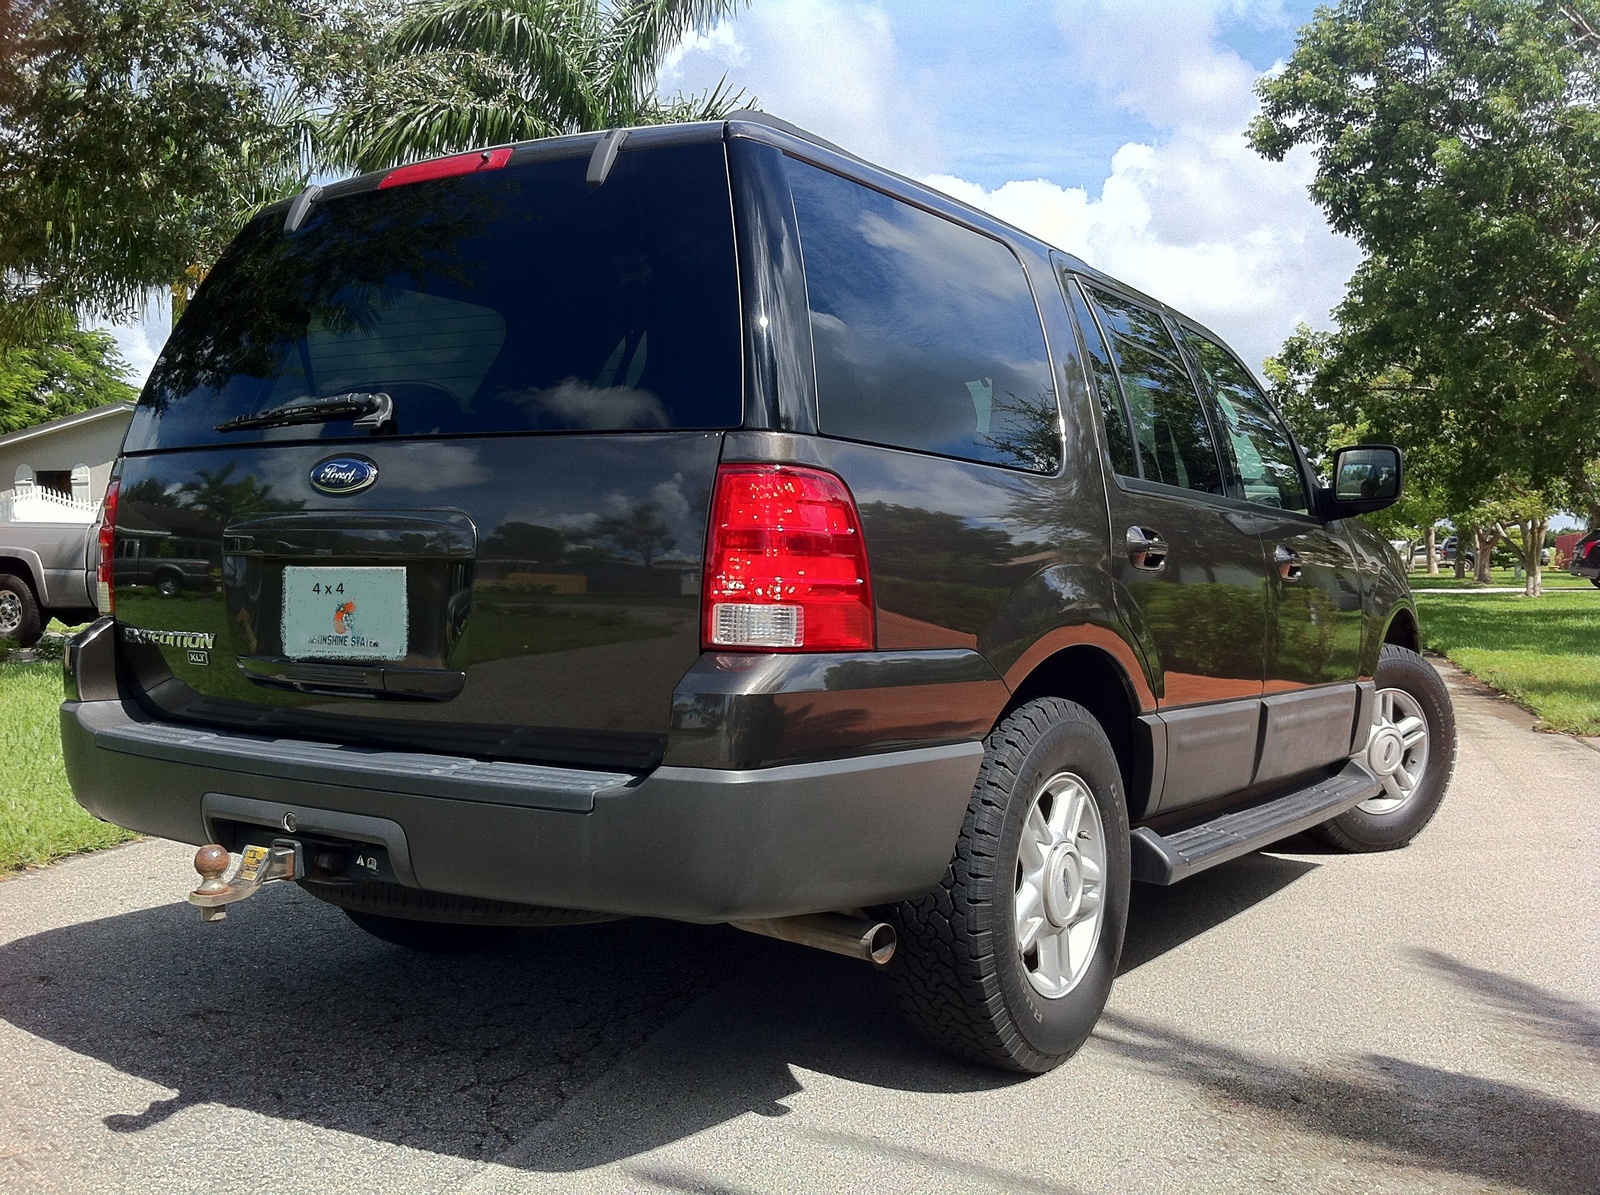 2006 Ford expedition xls review